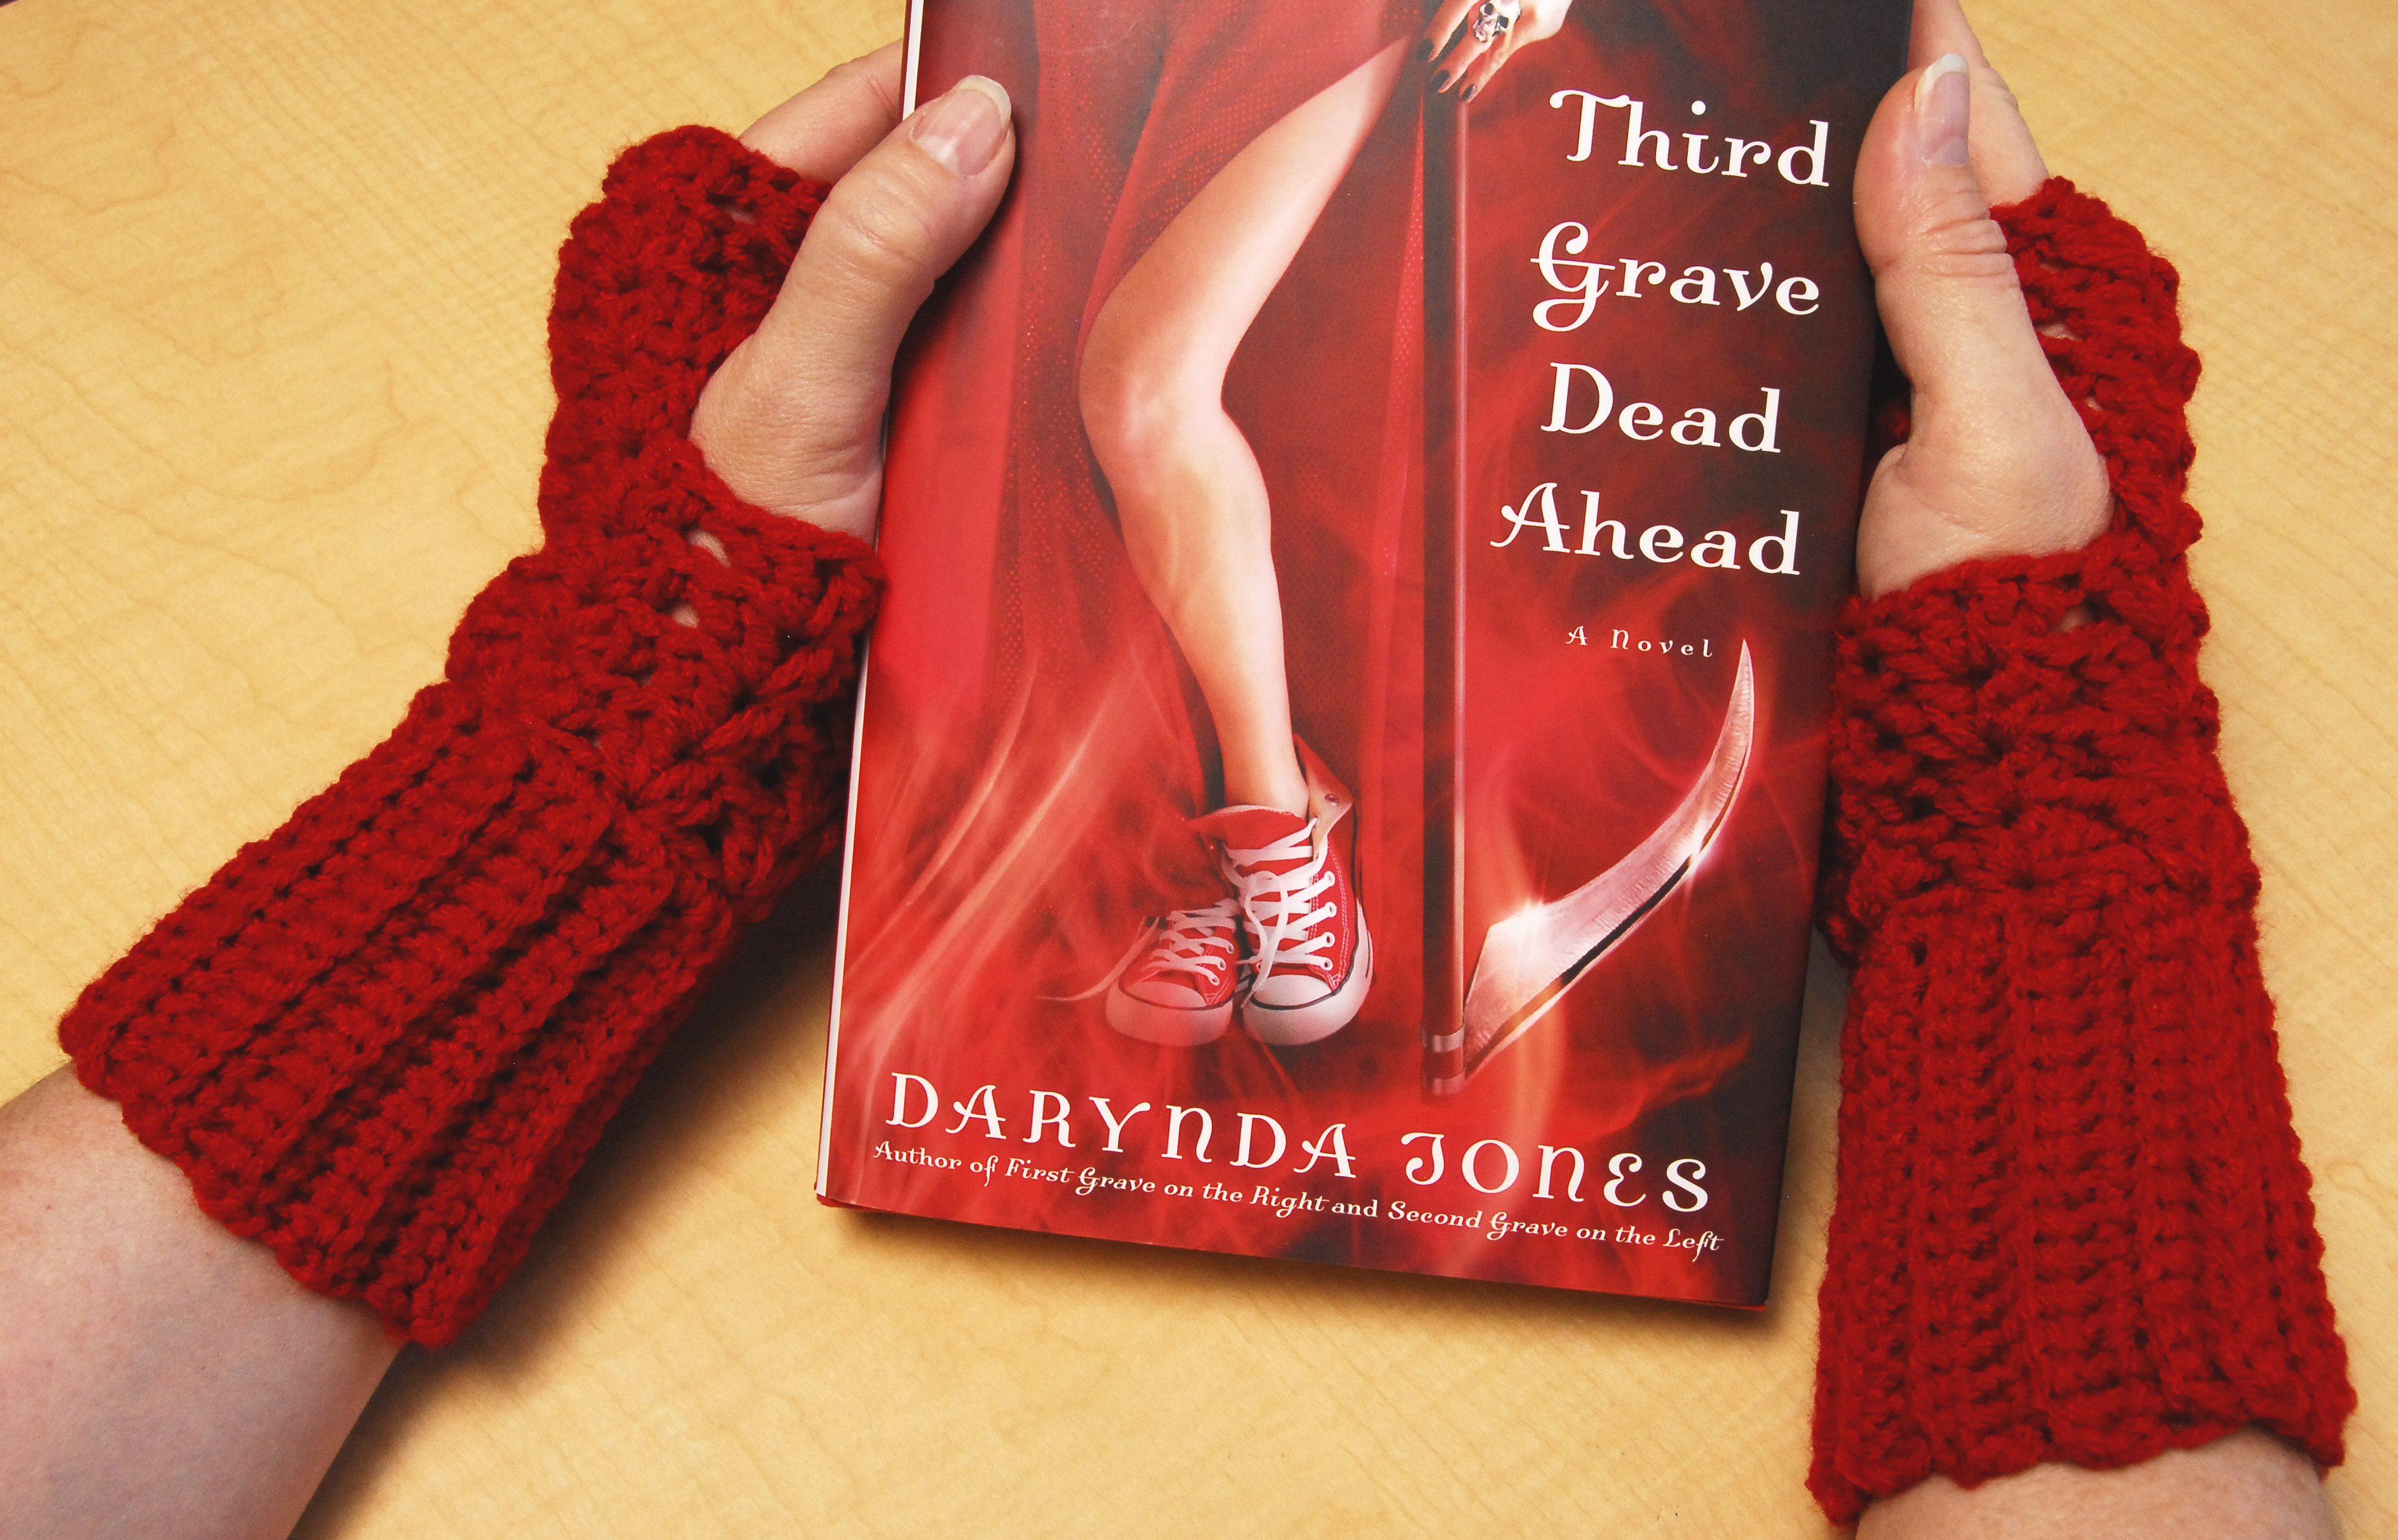 NYT Best Selling Author Darynda Jones Owns a Pair of My Fingerless Gloves (Woot!)